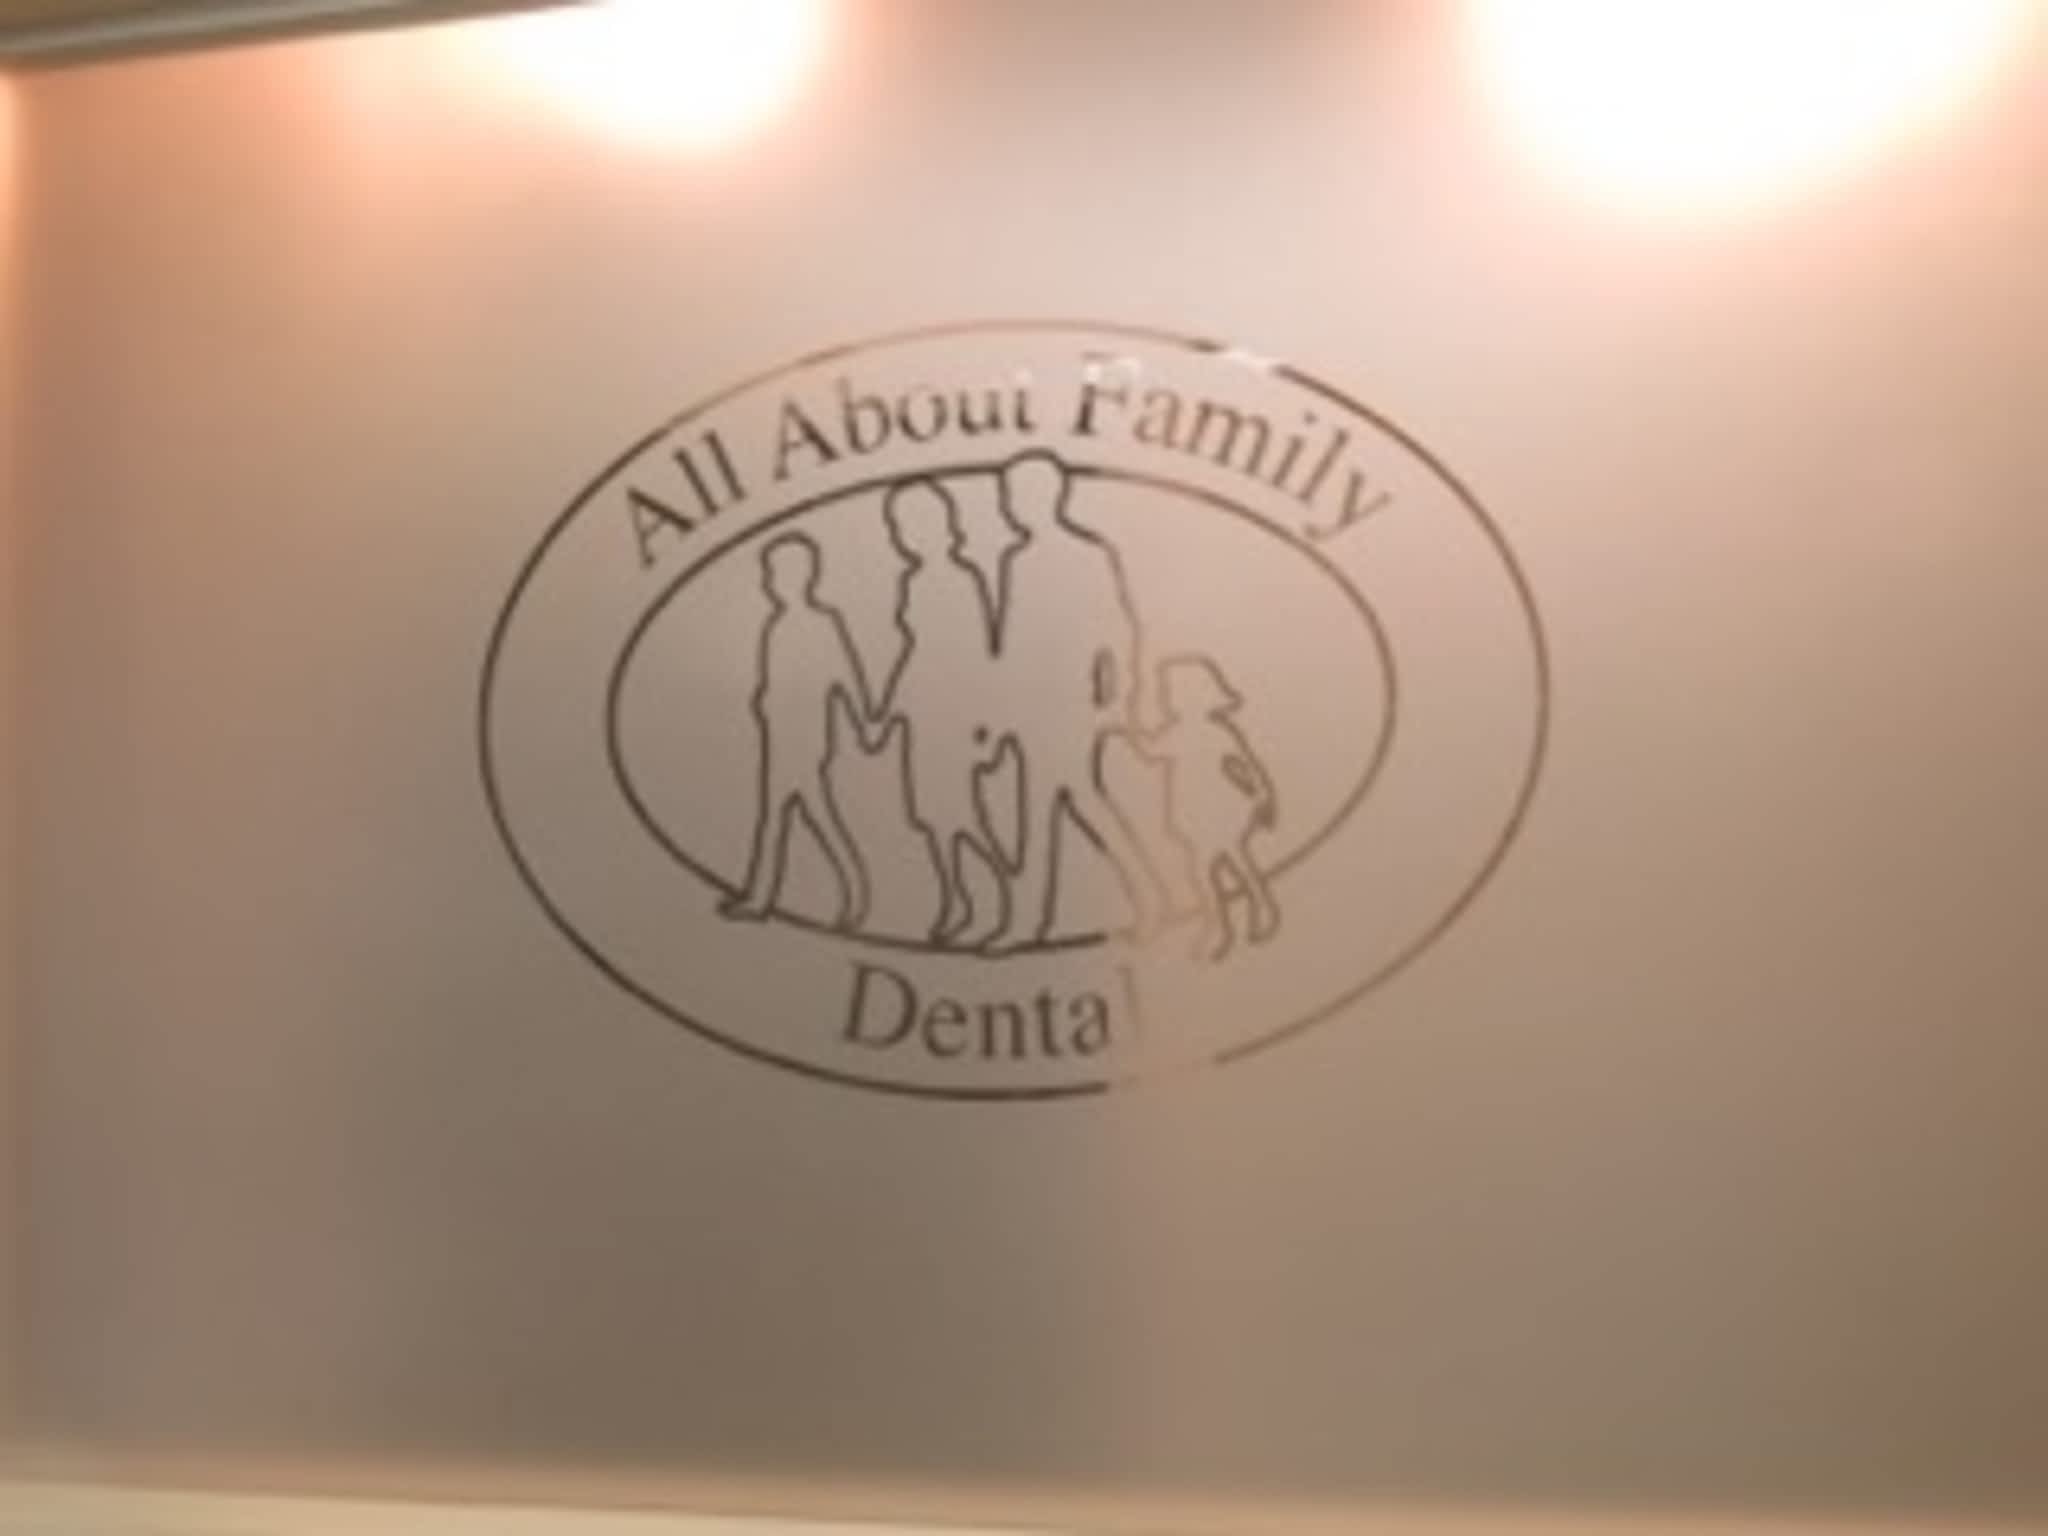 photo All About Family Dental